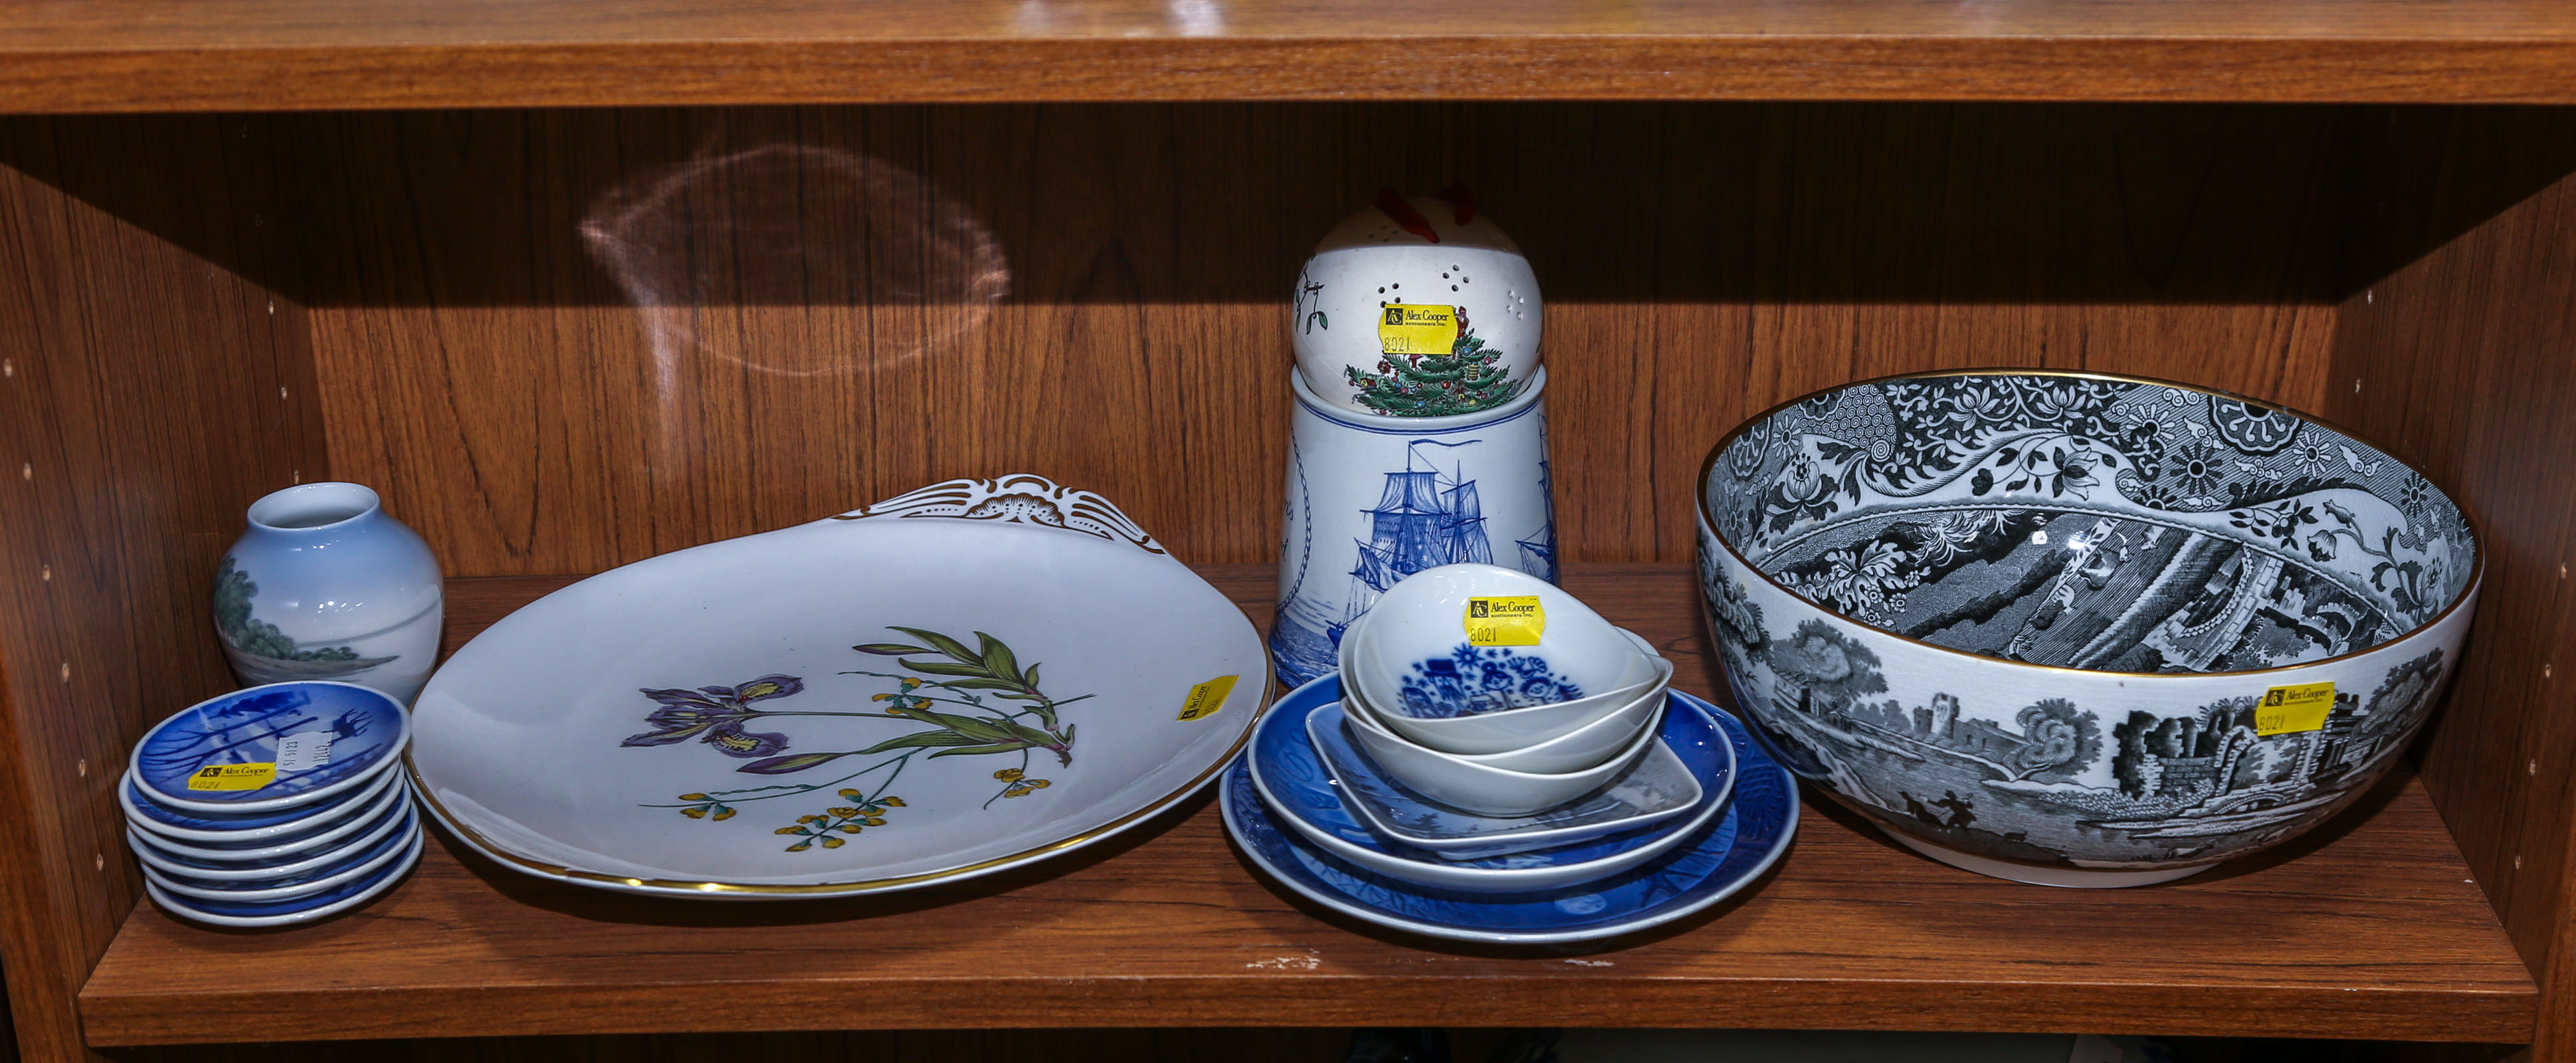 SELECTION OF DECORATIVE CHINA Including 3cb1fd